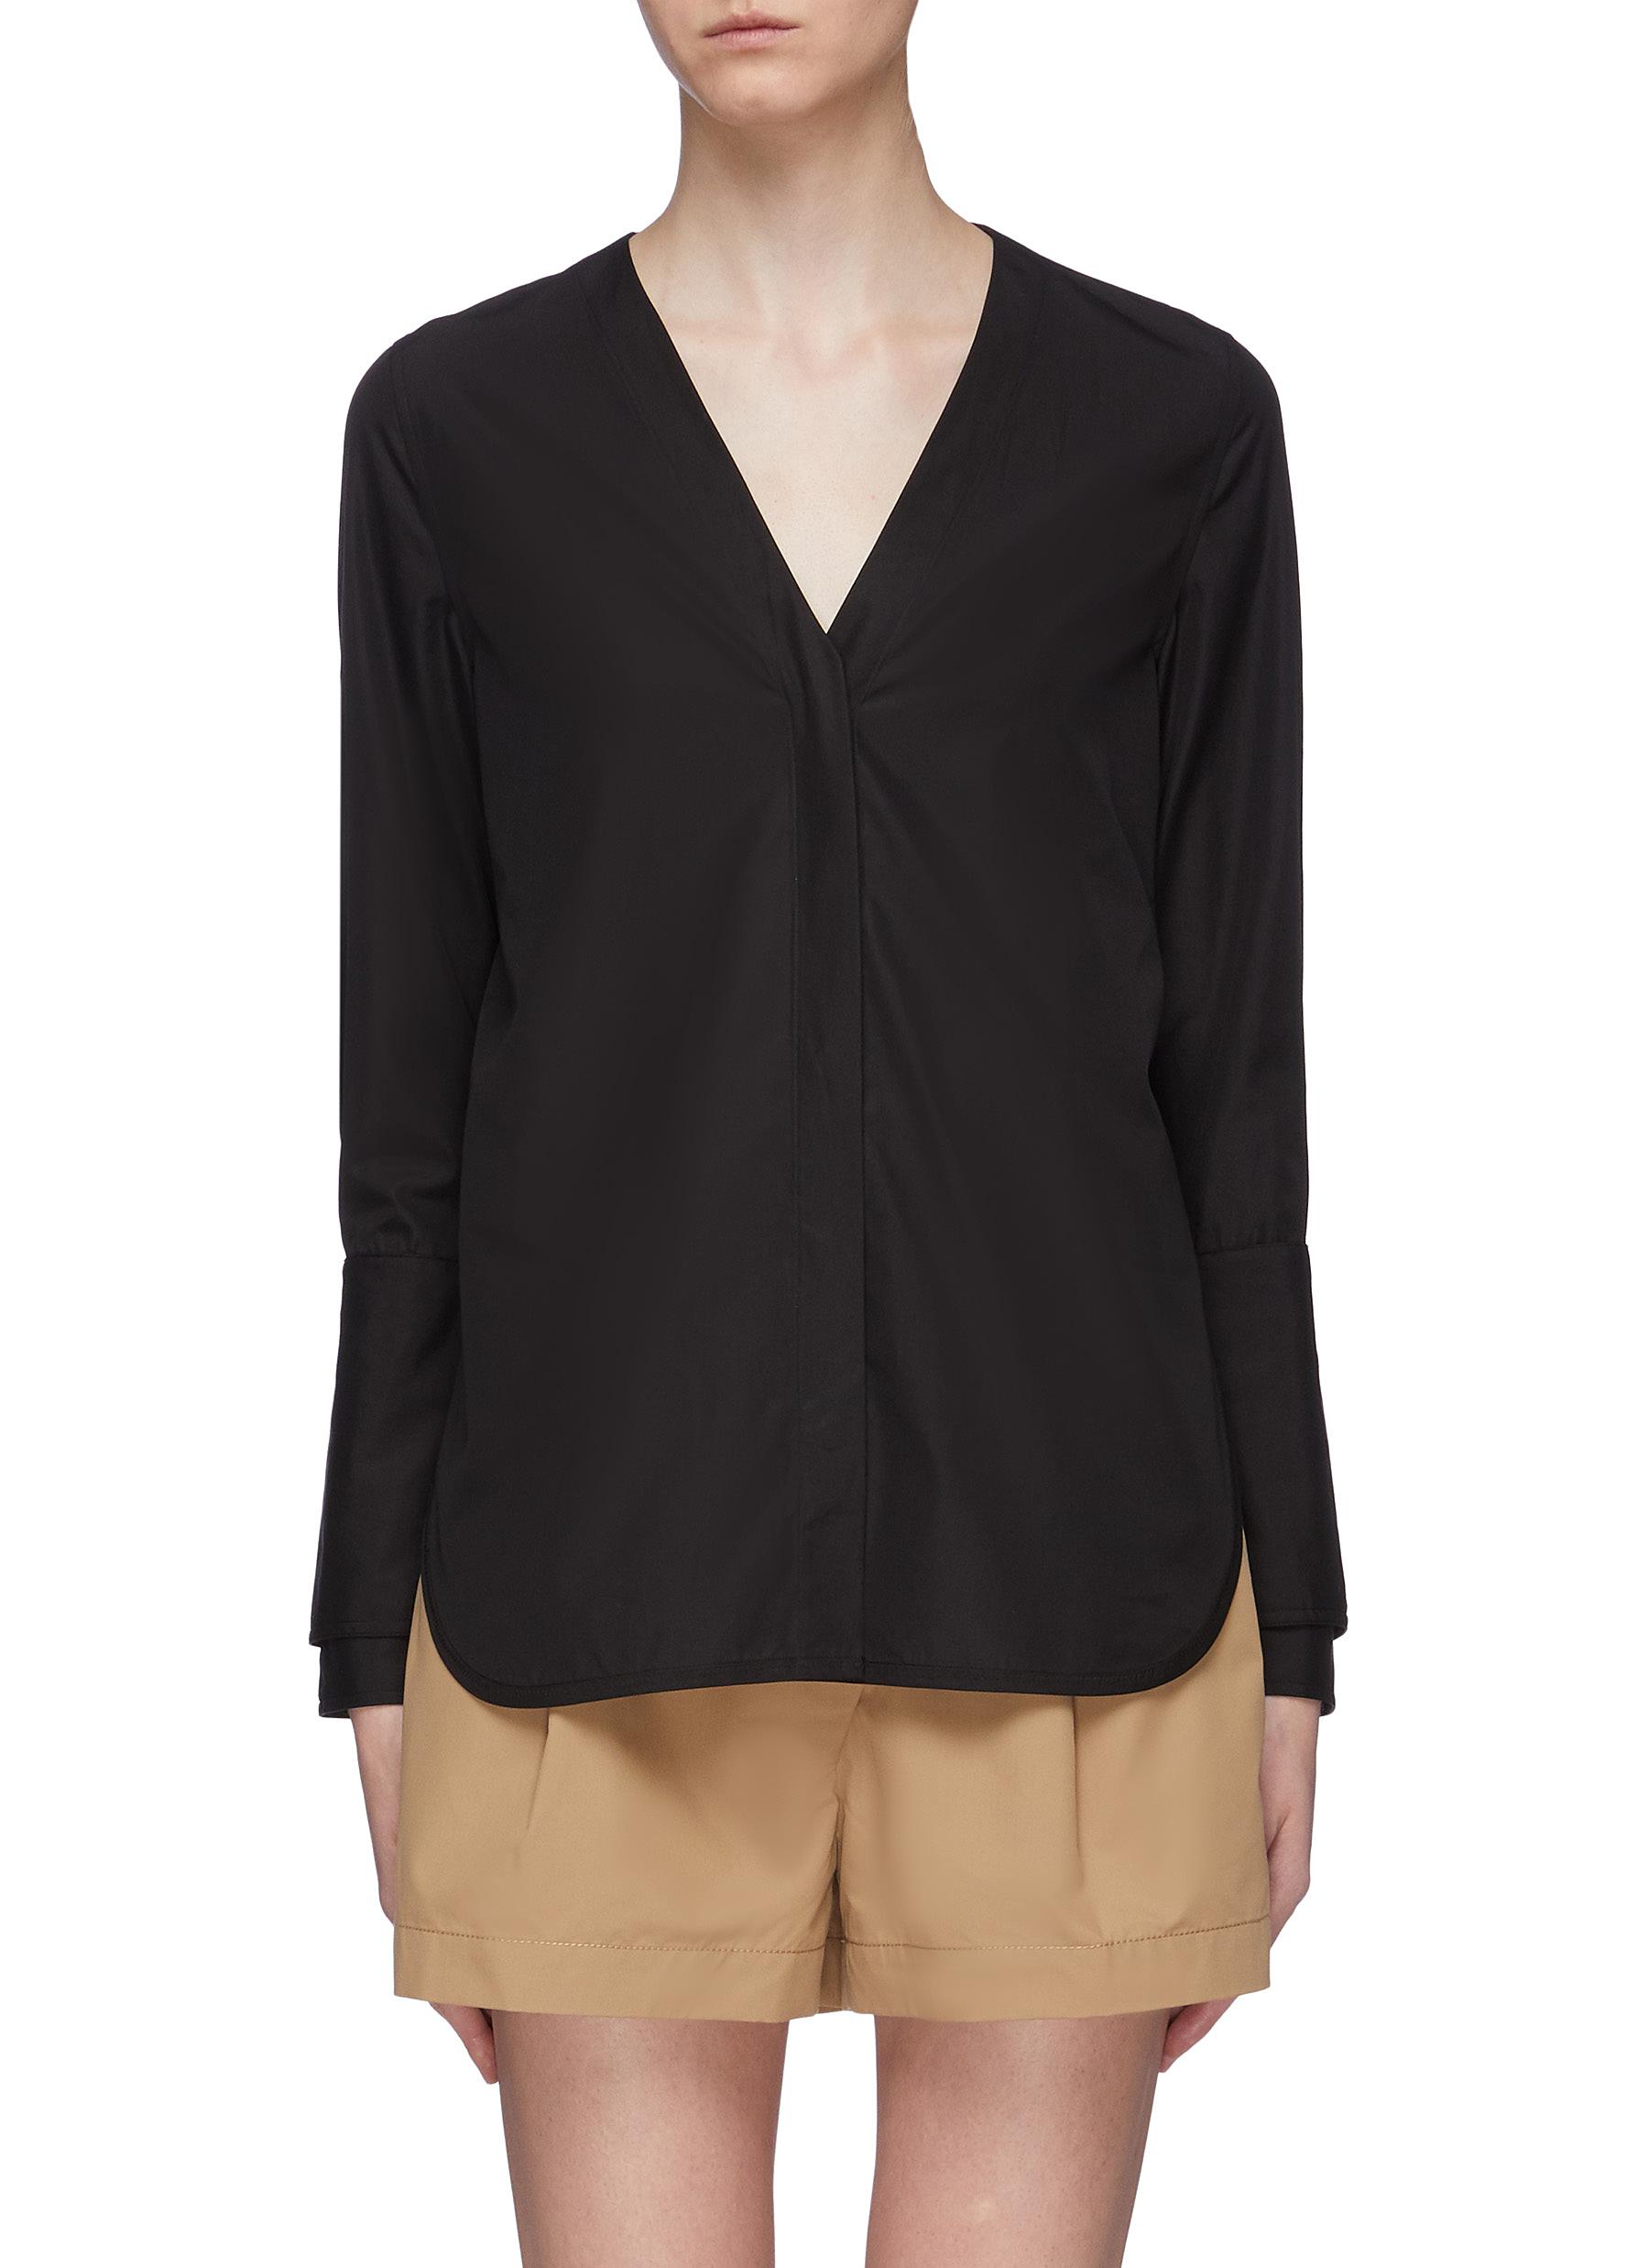 Belted back faux pearl button cuff shirt by 3.1 Phillip Lim